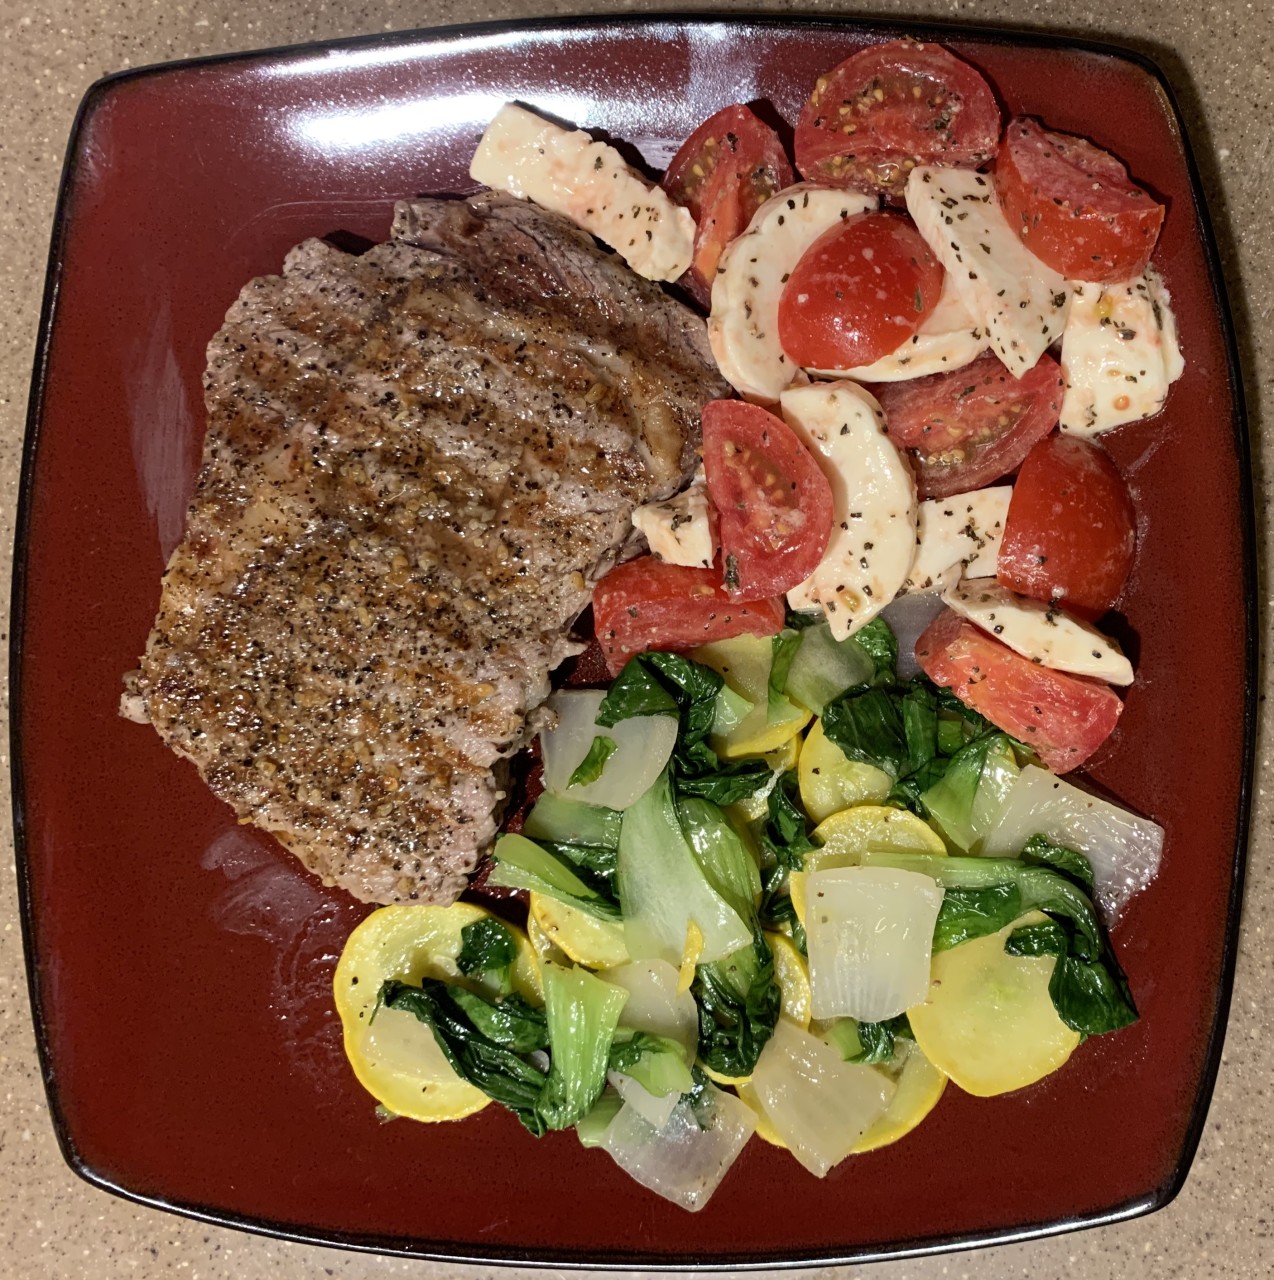 <a class="bx-tag" rel="tag" href="https://streetloc.com/view-channel-profile/whatsfordinner"><s>#</s><b>whatsfordinner</b></a> Grilled Steak, Caprese, and Onion-Butter Sauteed Bok Choy and Yellow Squash